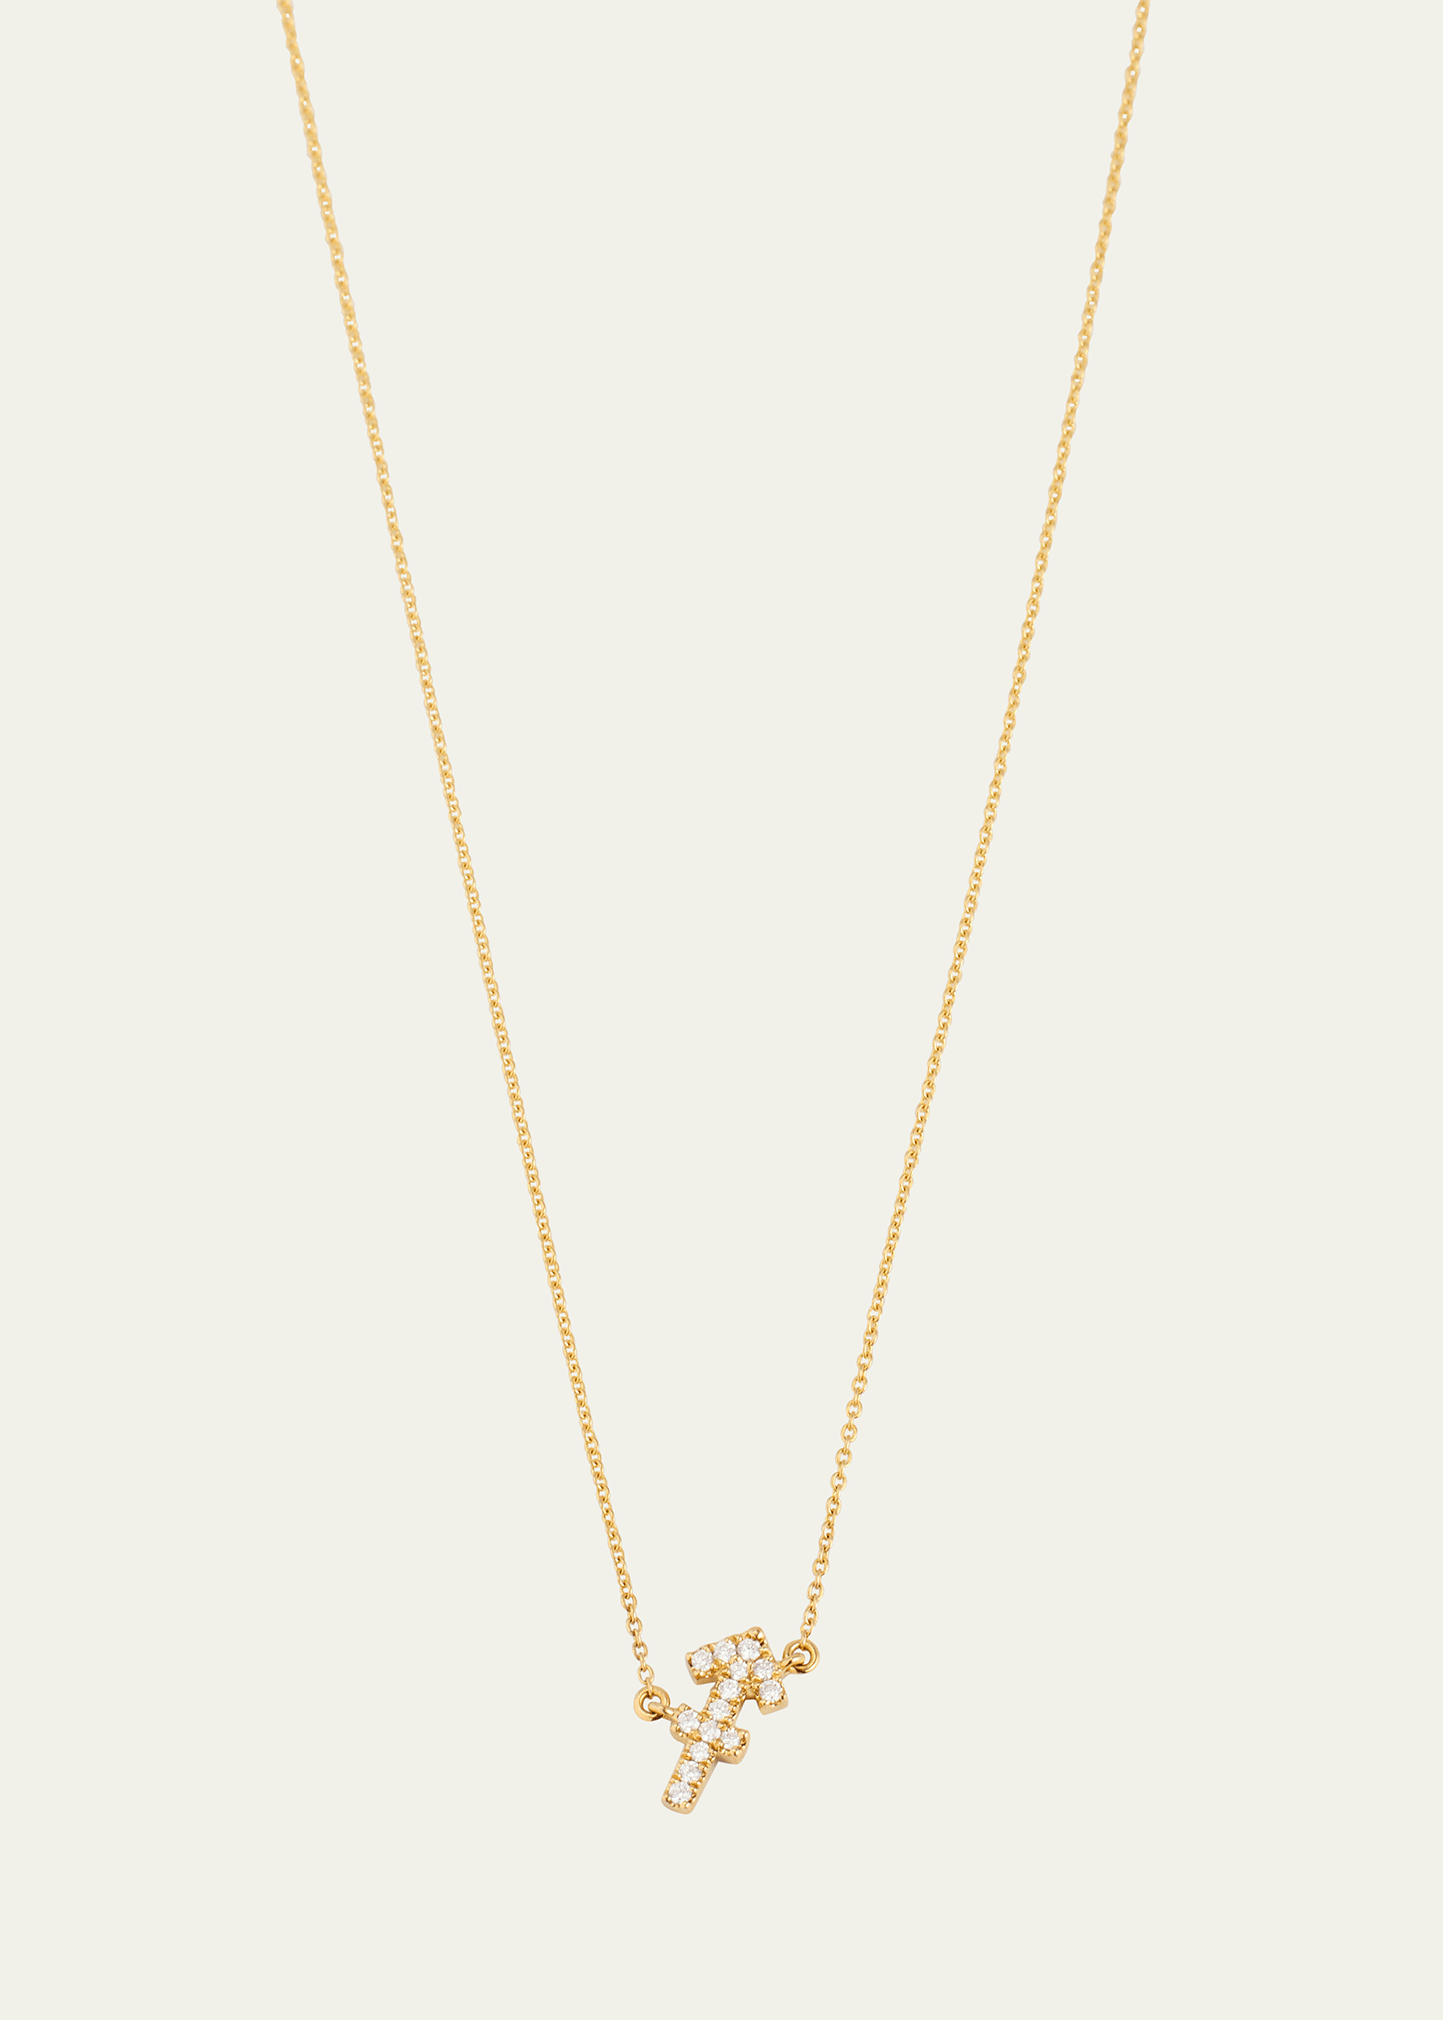 Star Sign Necklace, Saggitarius, in Yellow Gold and White Diamonds